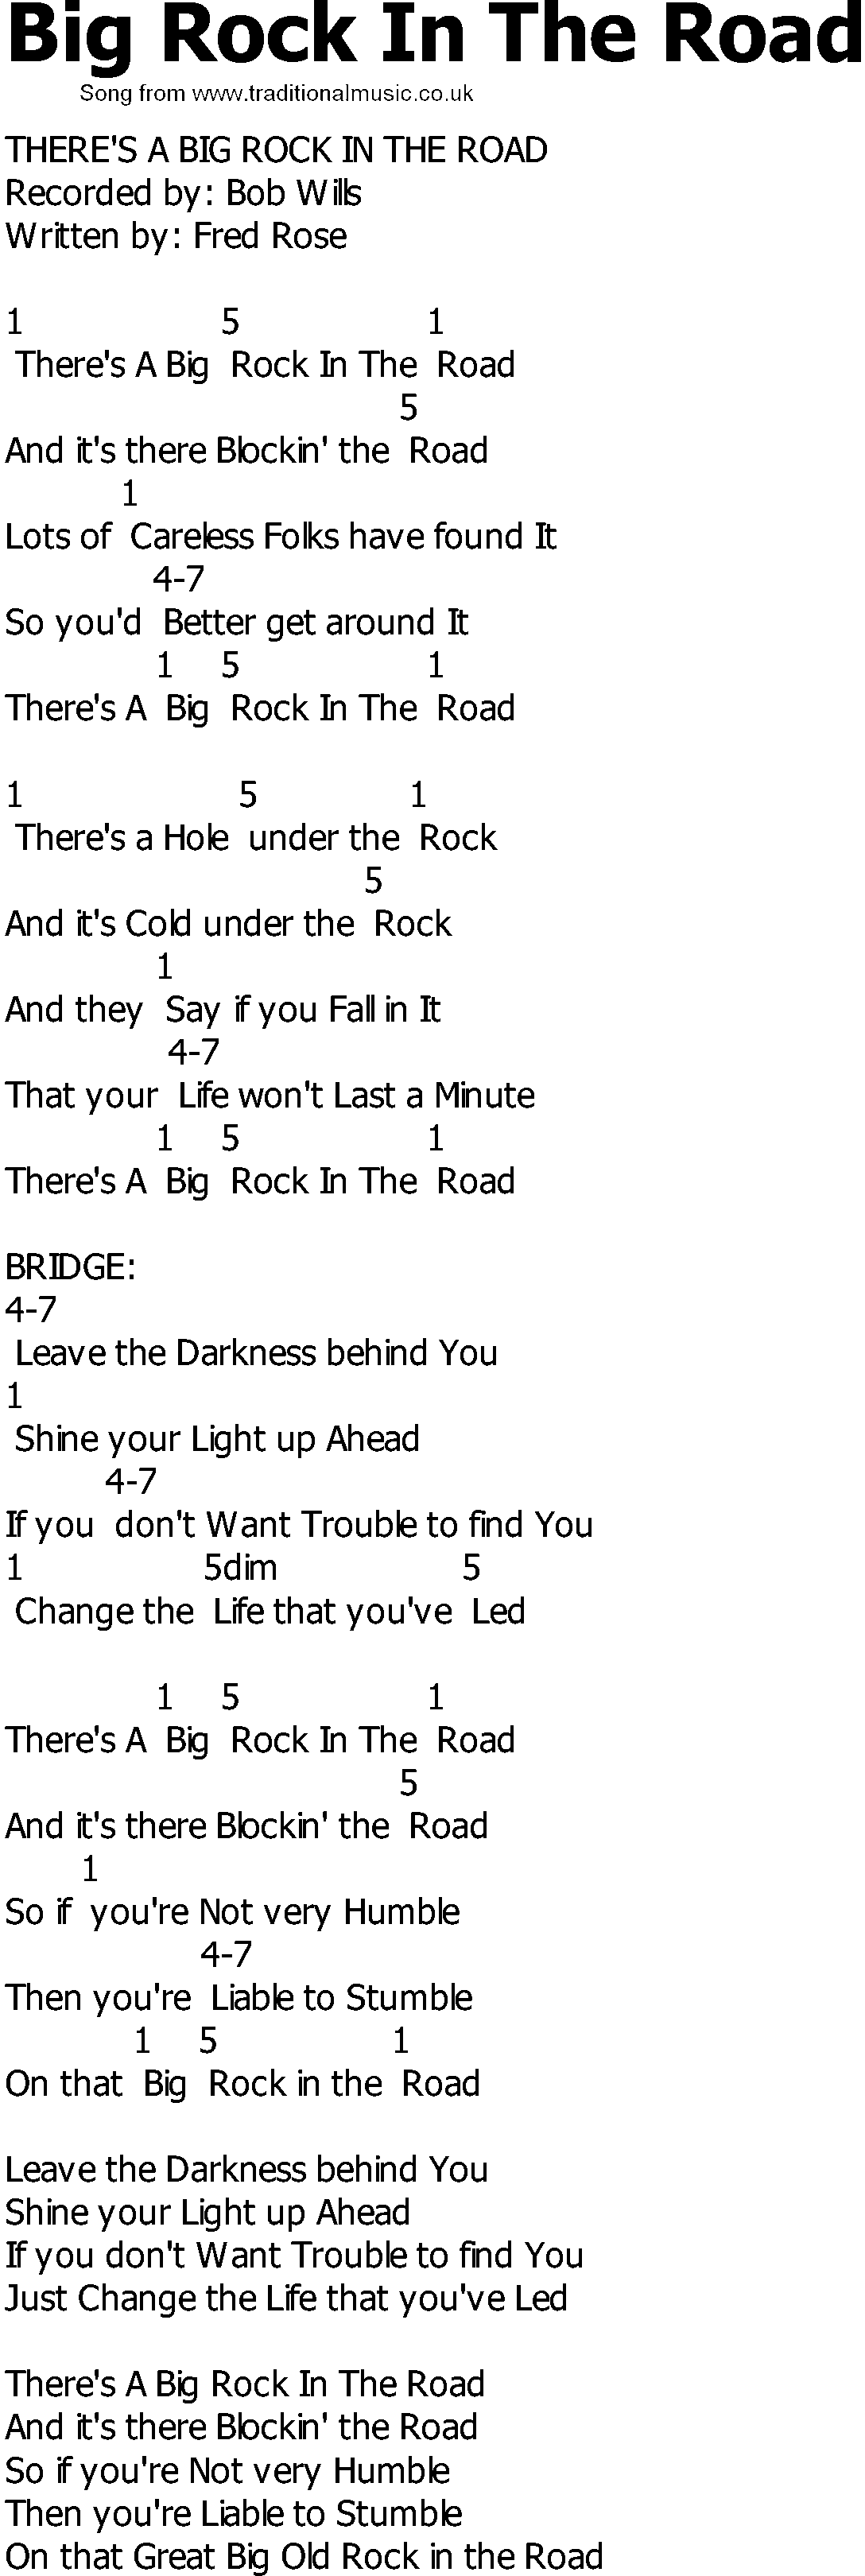 Old Country song lyrics with chords - Big Rock In The Road